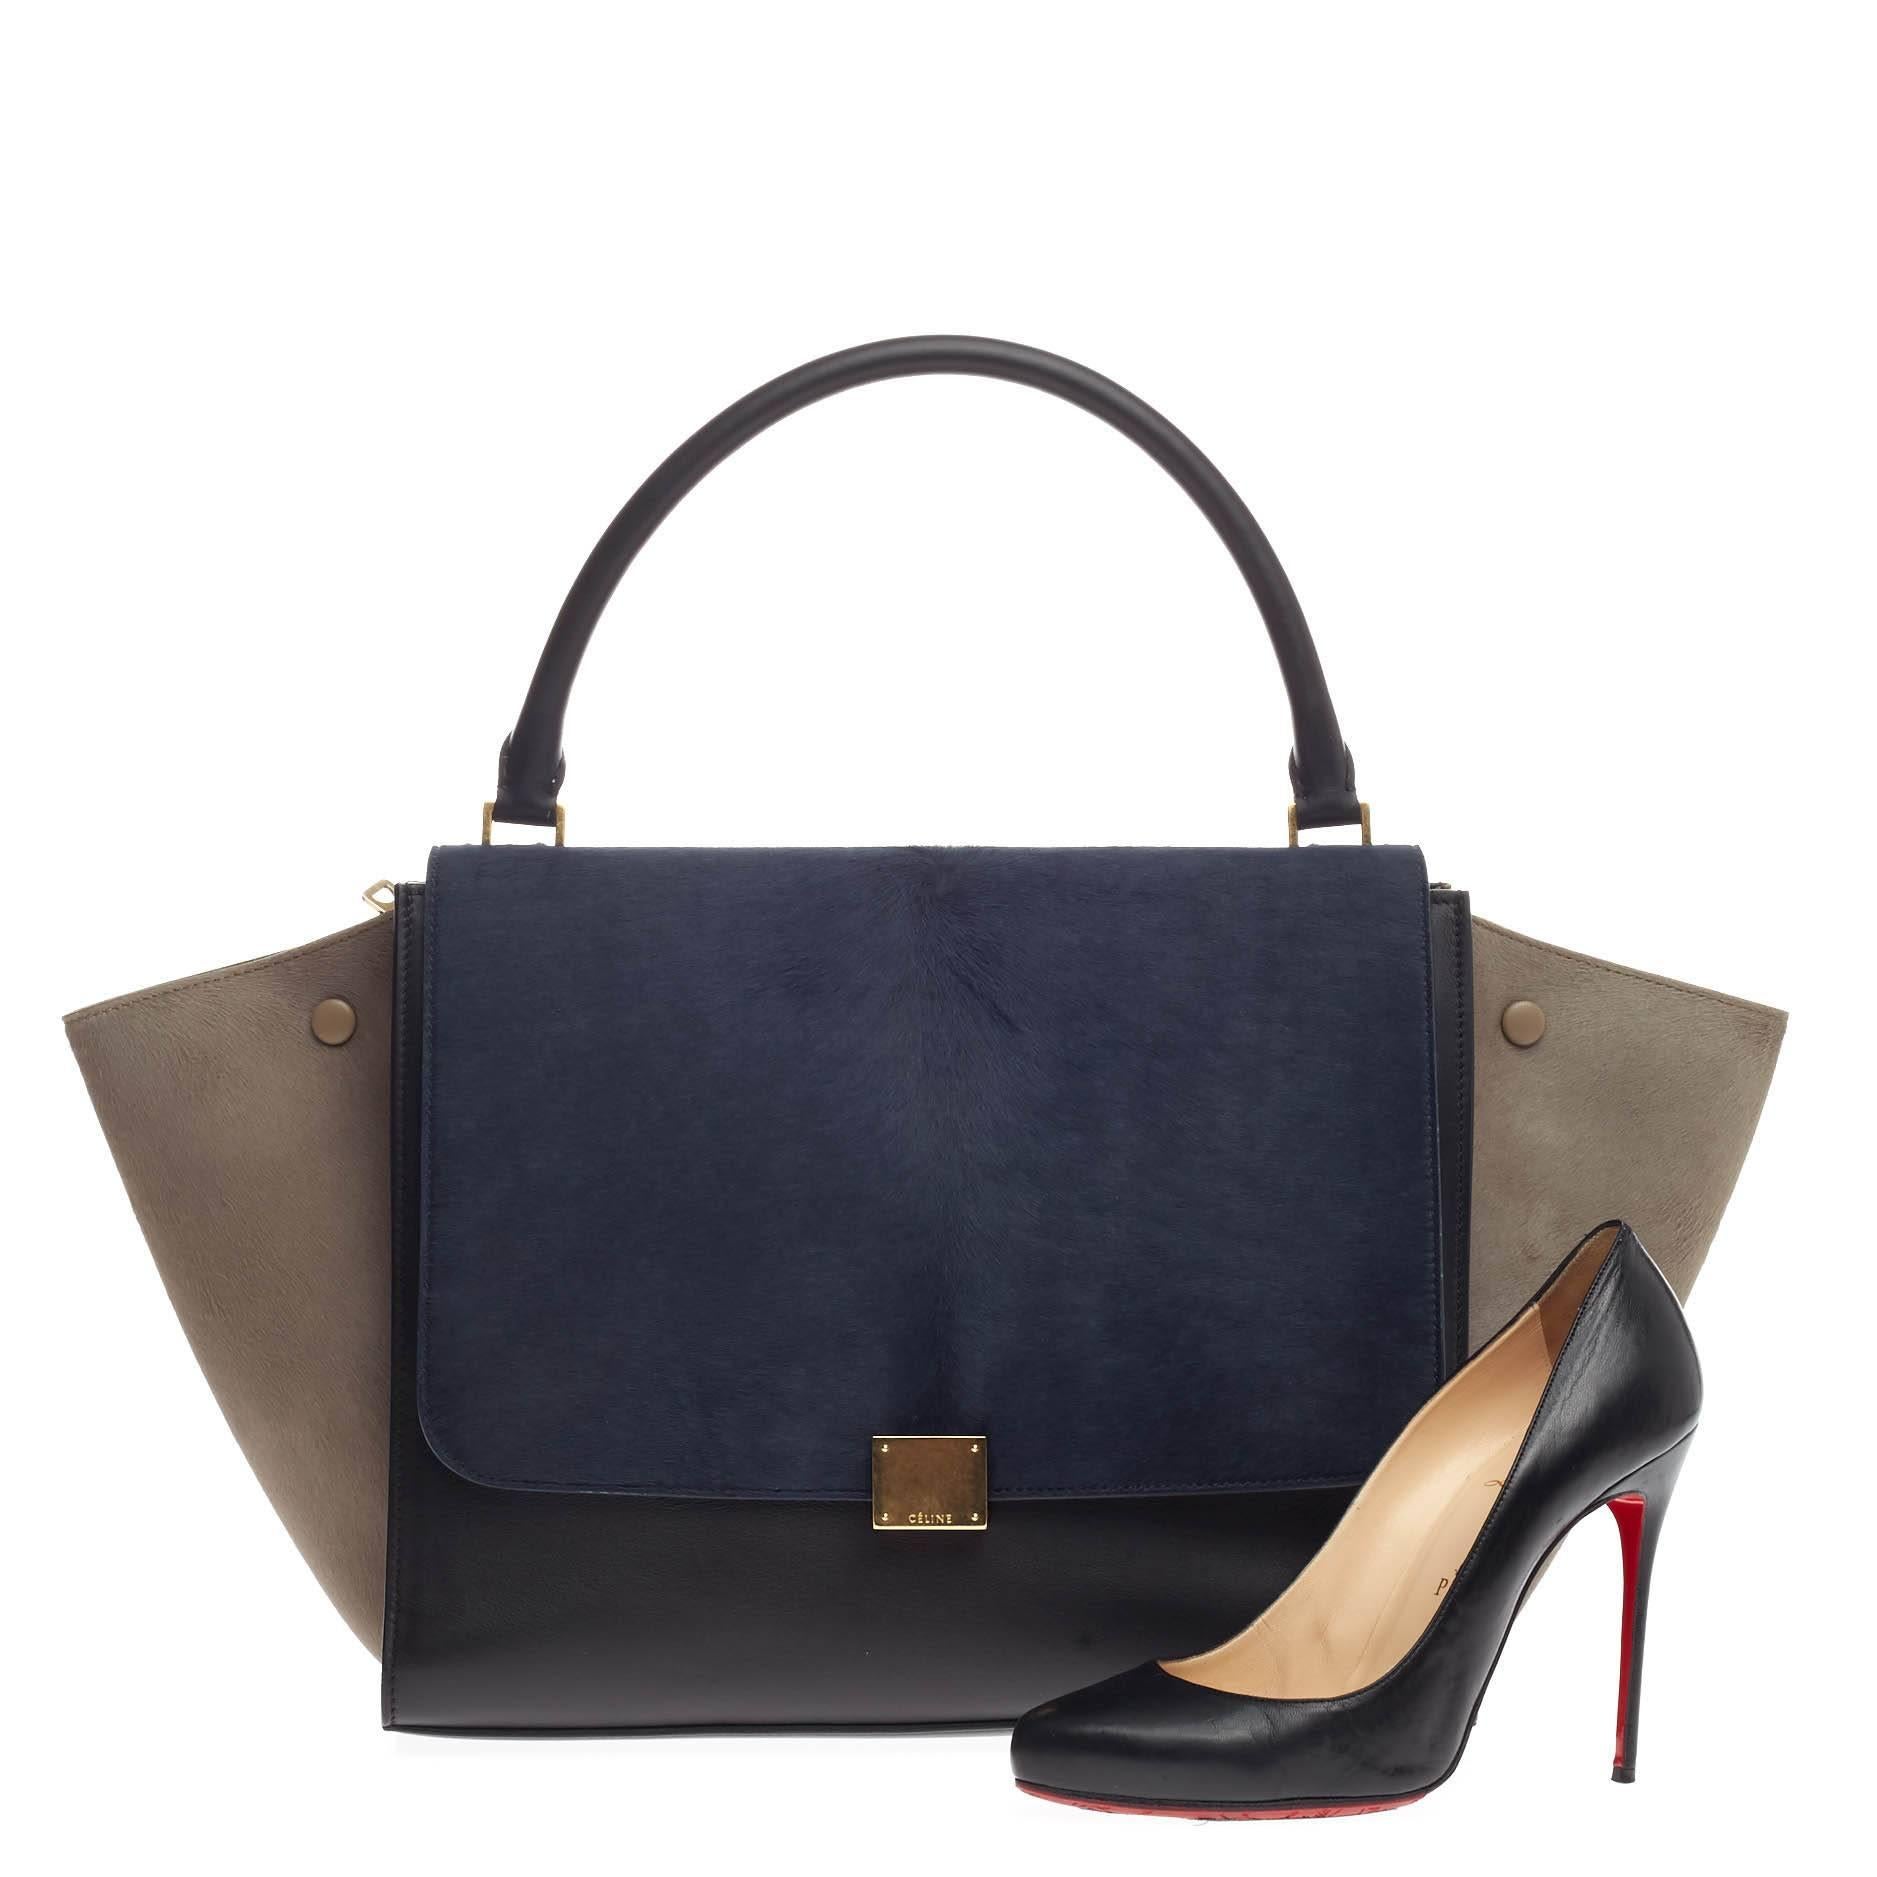 This authentic Celine Tricolor Trapeze Pony Hair Large is a modern minimalist design with a playful twist in an array of subdued colors. Crafted from tricolor navy blue, taupe pony hair and black leather, this classic tote features a top looped